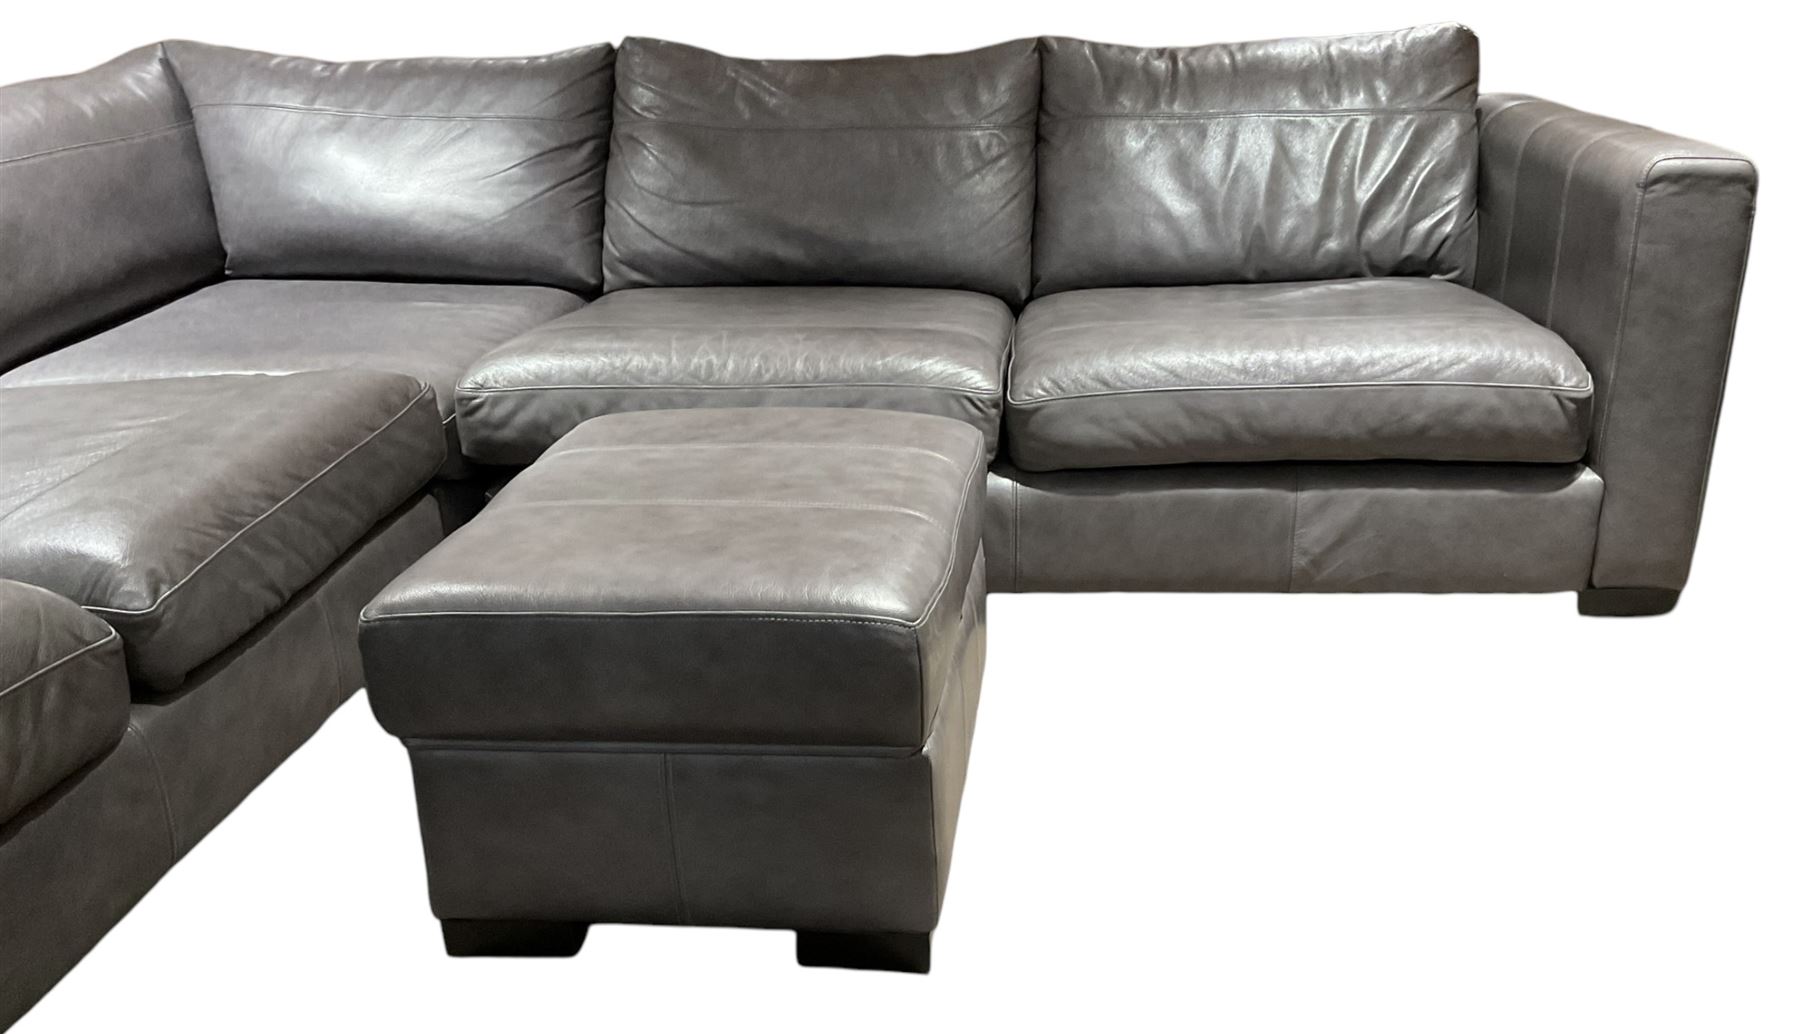 Sofa Workshop - five-seat corner sofa; matching footstool; upholstered in Italian grey leather - Image 5 of 7